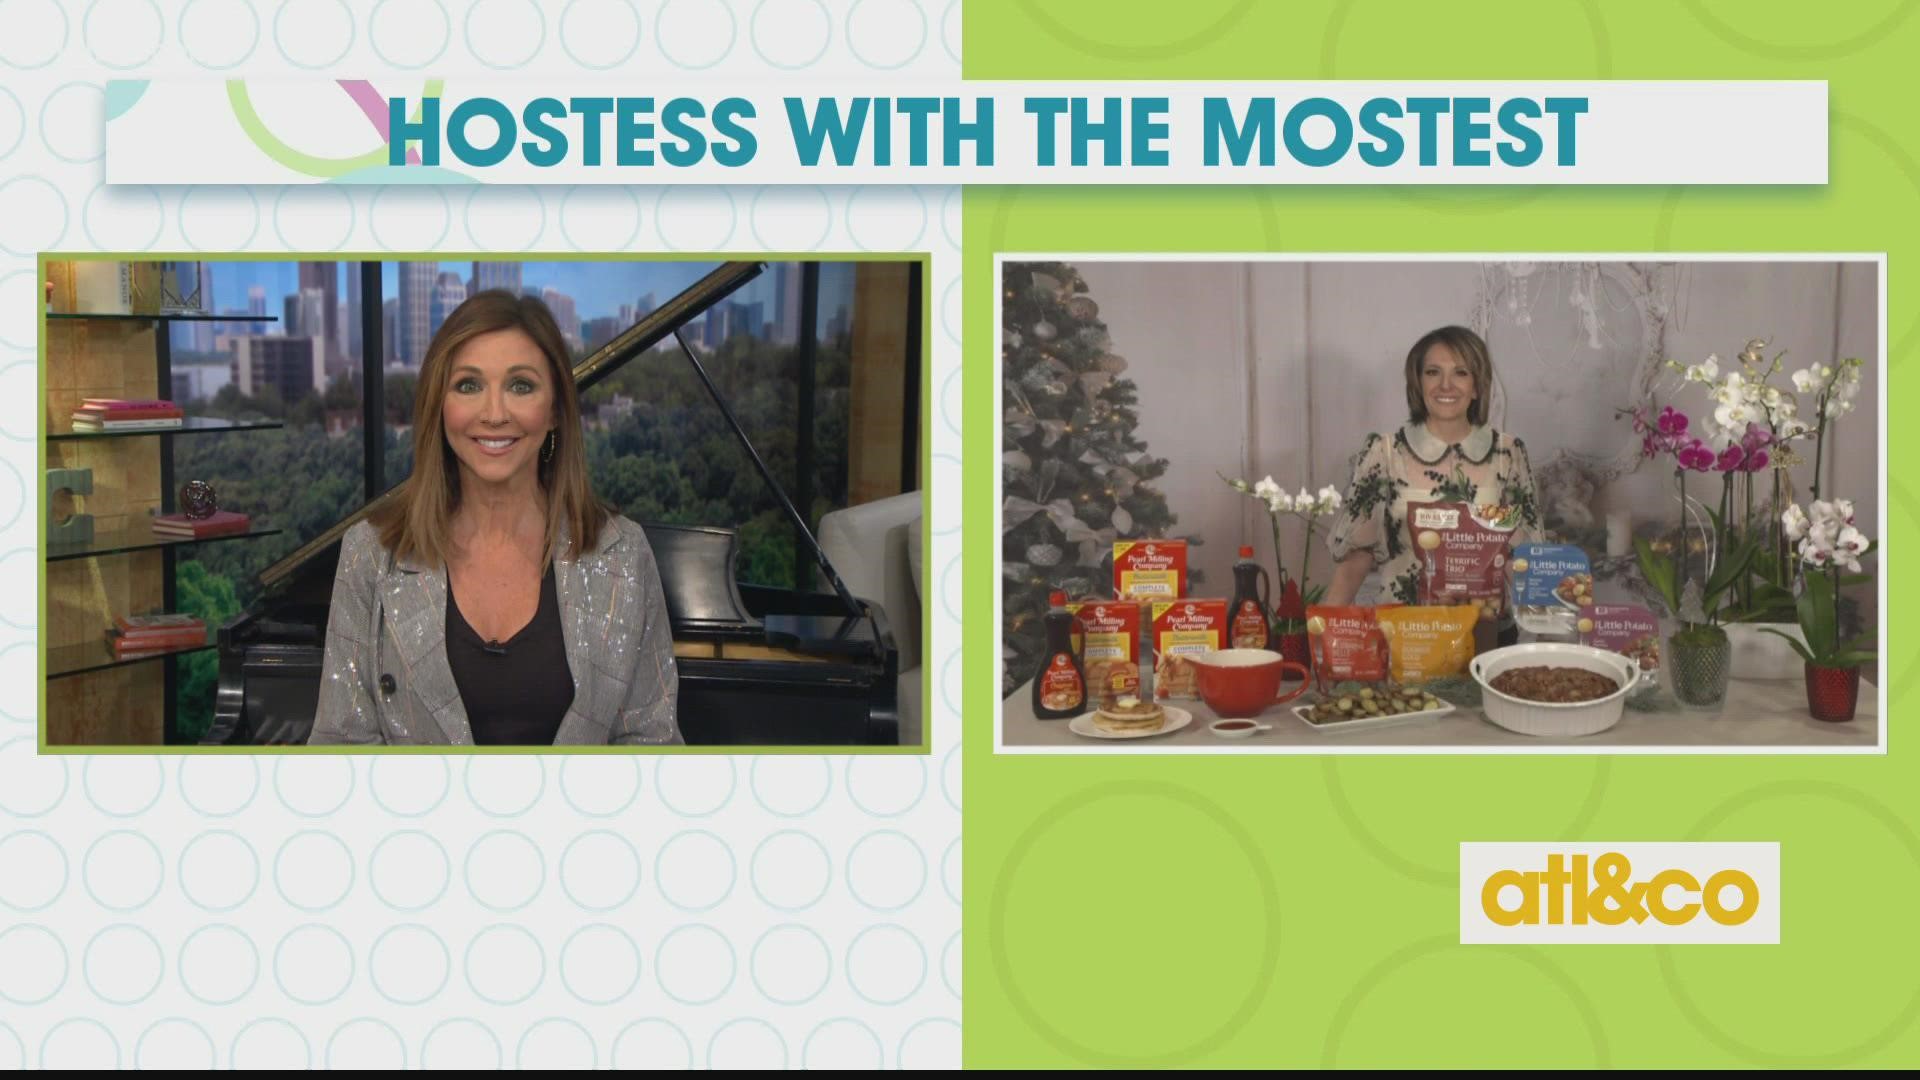 Lifestyle editor Joann Butler shares must-haves for your holiday parties.